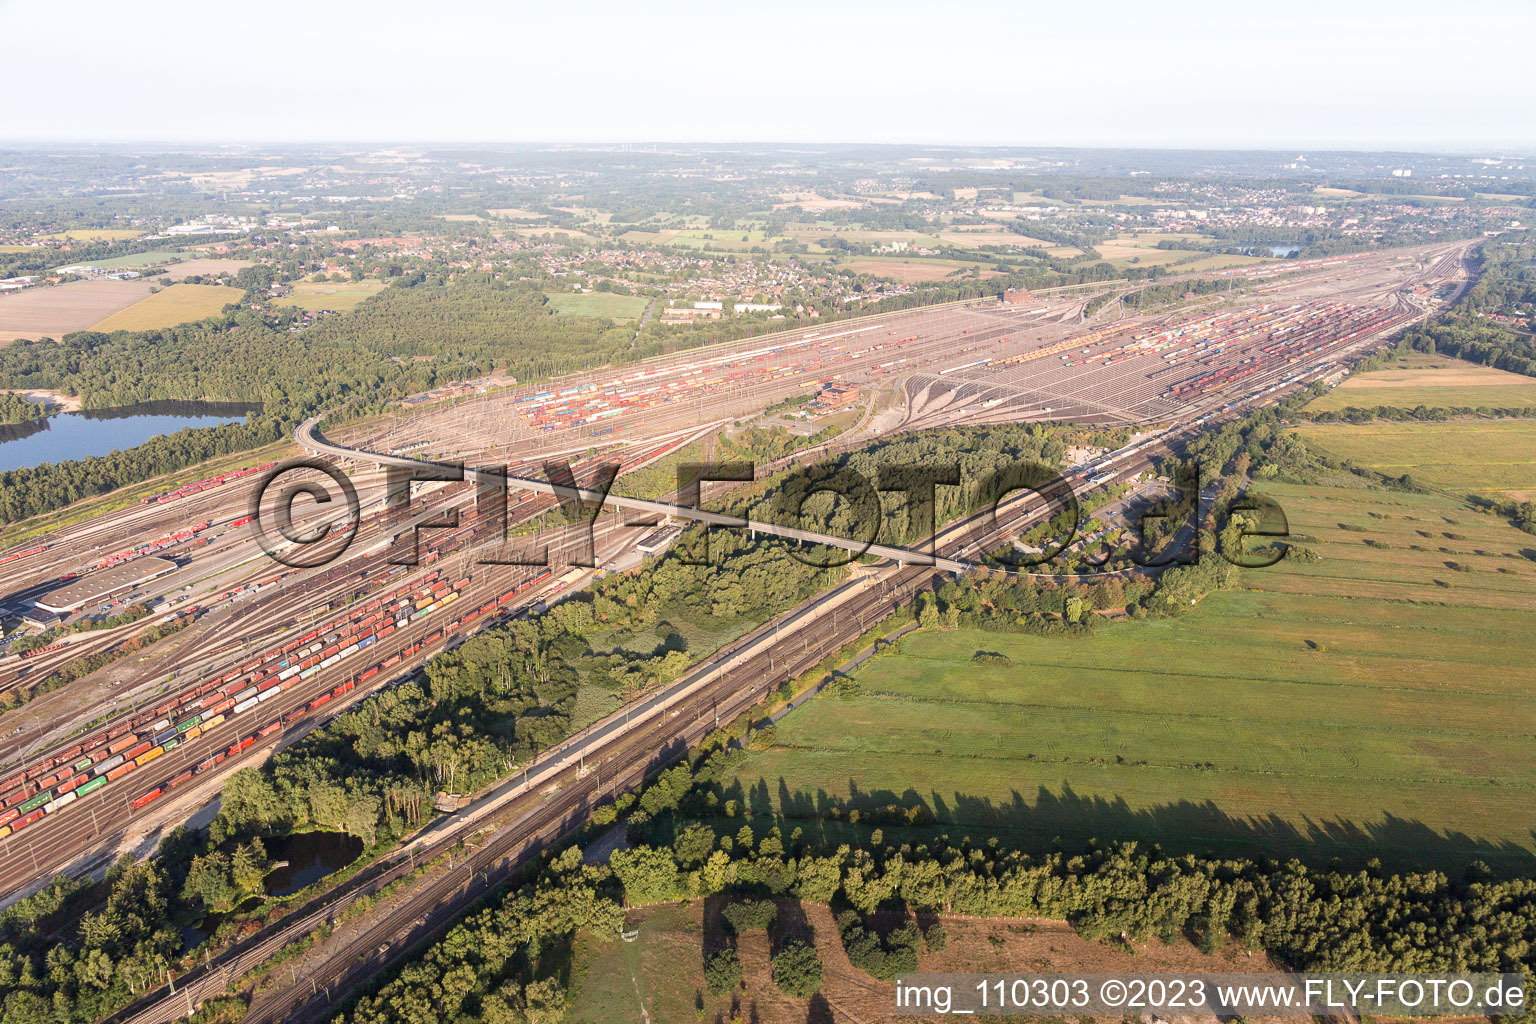 Marshalling yard and freight station Maschen of the Deutsche Bahn in the district Maschen in Seevetal in the state Lower Saxony, Germany from the drone perspective